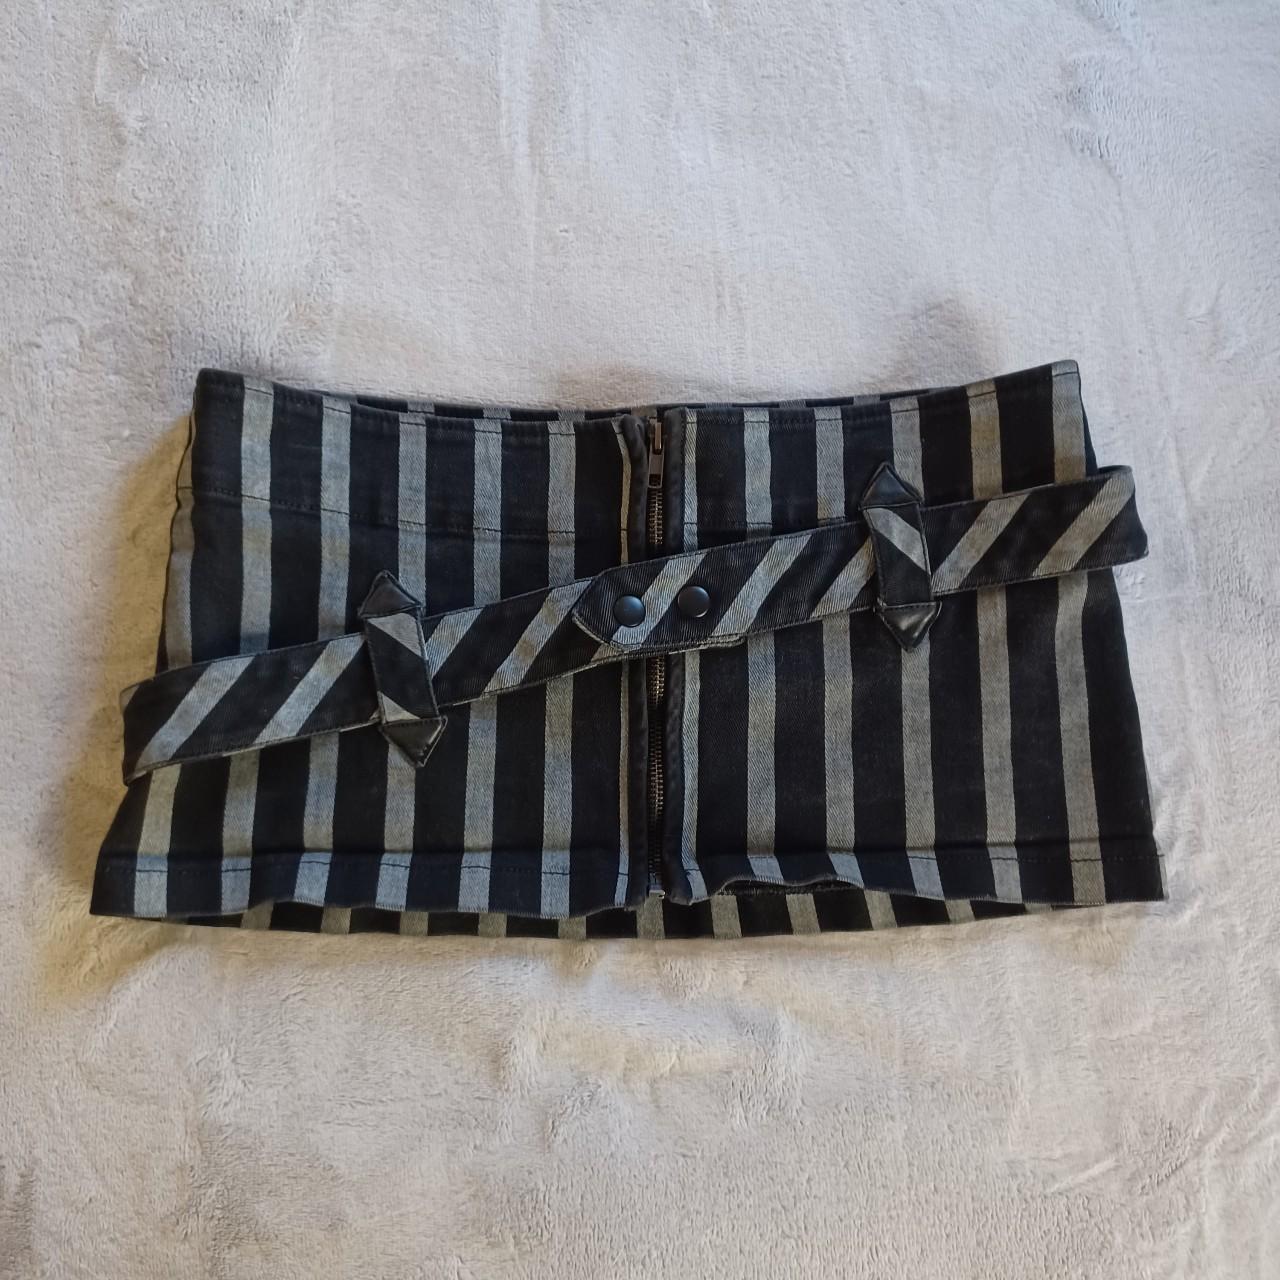 Extremely hard to find Psycho Circus mini skirt in... - Depop